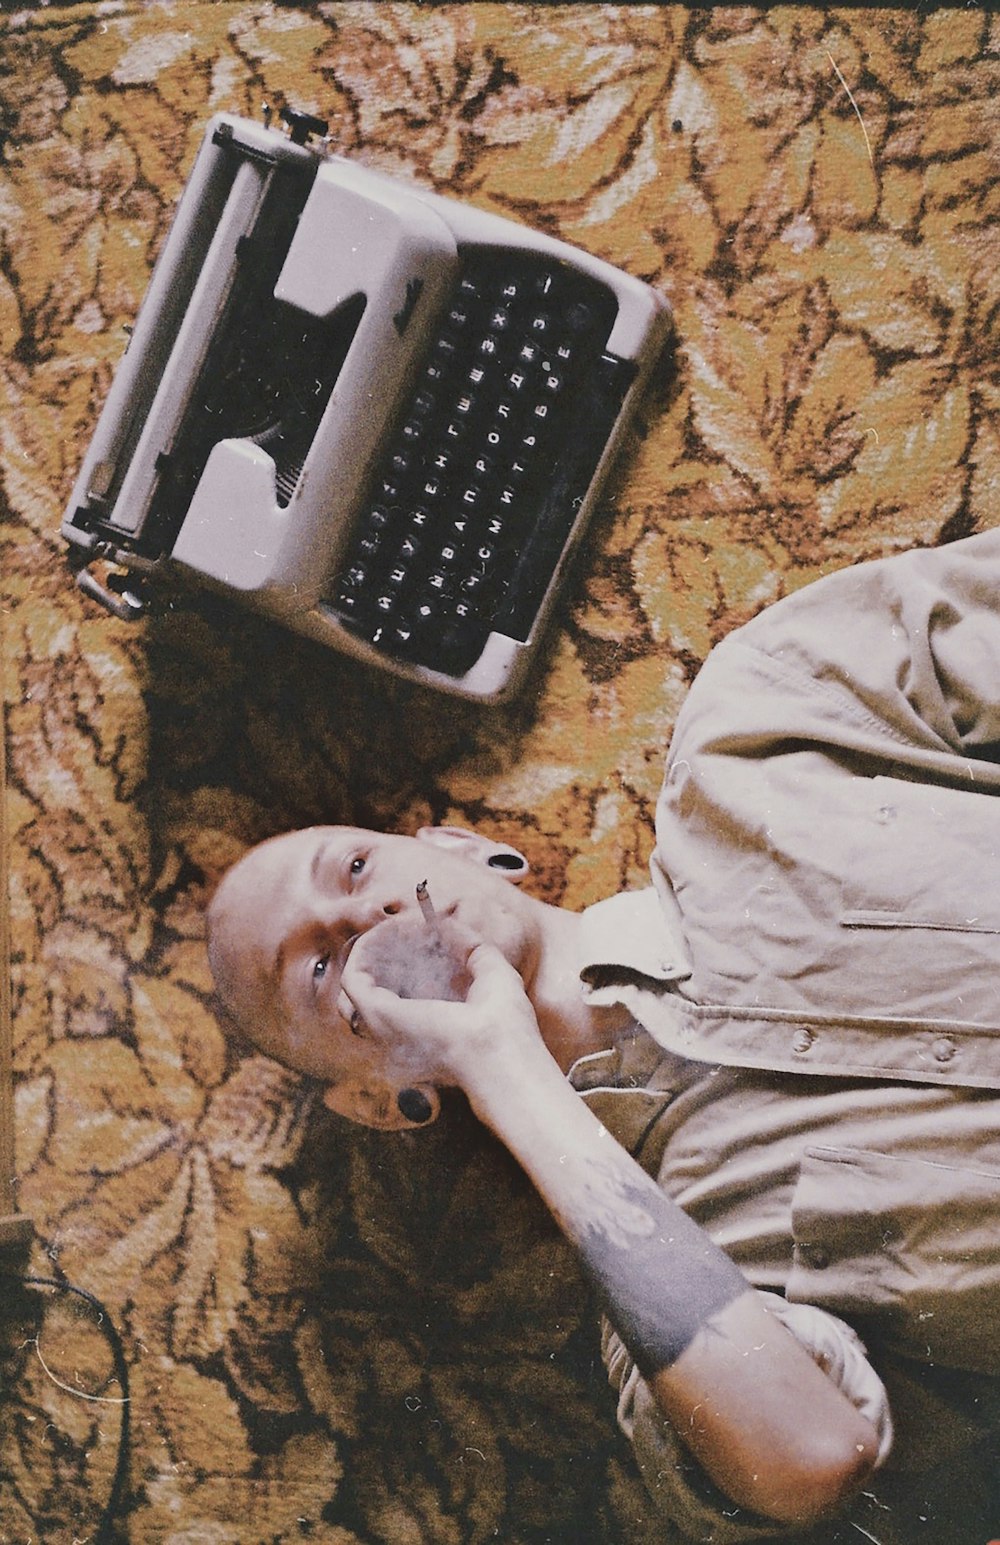 a man laying on the floor next to a computer keyboard